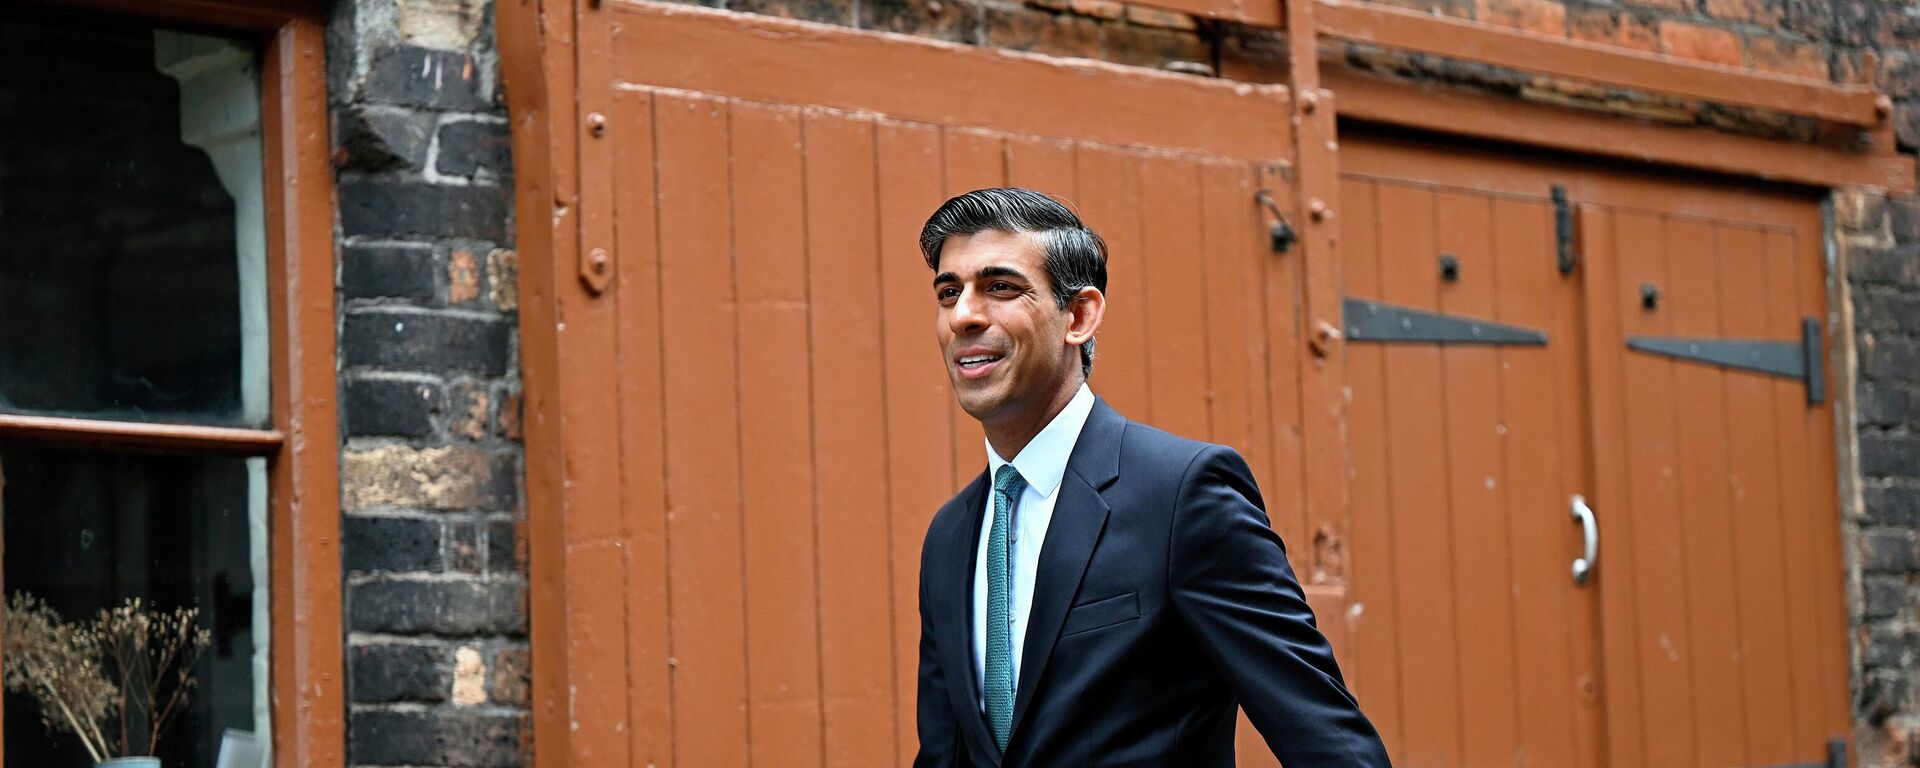 FILE - Britain's Chancellor of the Exchequer Rishi Sunak arrives for a regional cabinet meeting at Middleport Pottery in Stoke on Trent, England, Thursday, May 12, 2022 - Sputnik International, 1920, 24.10.2022